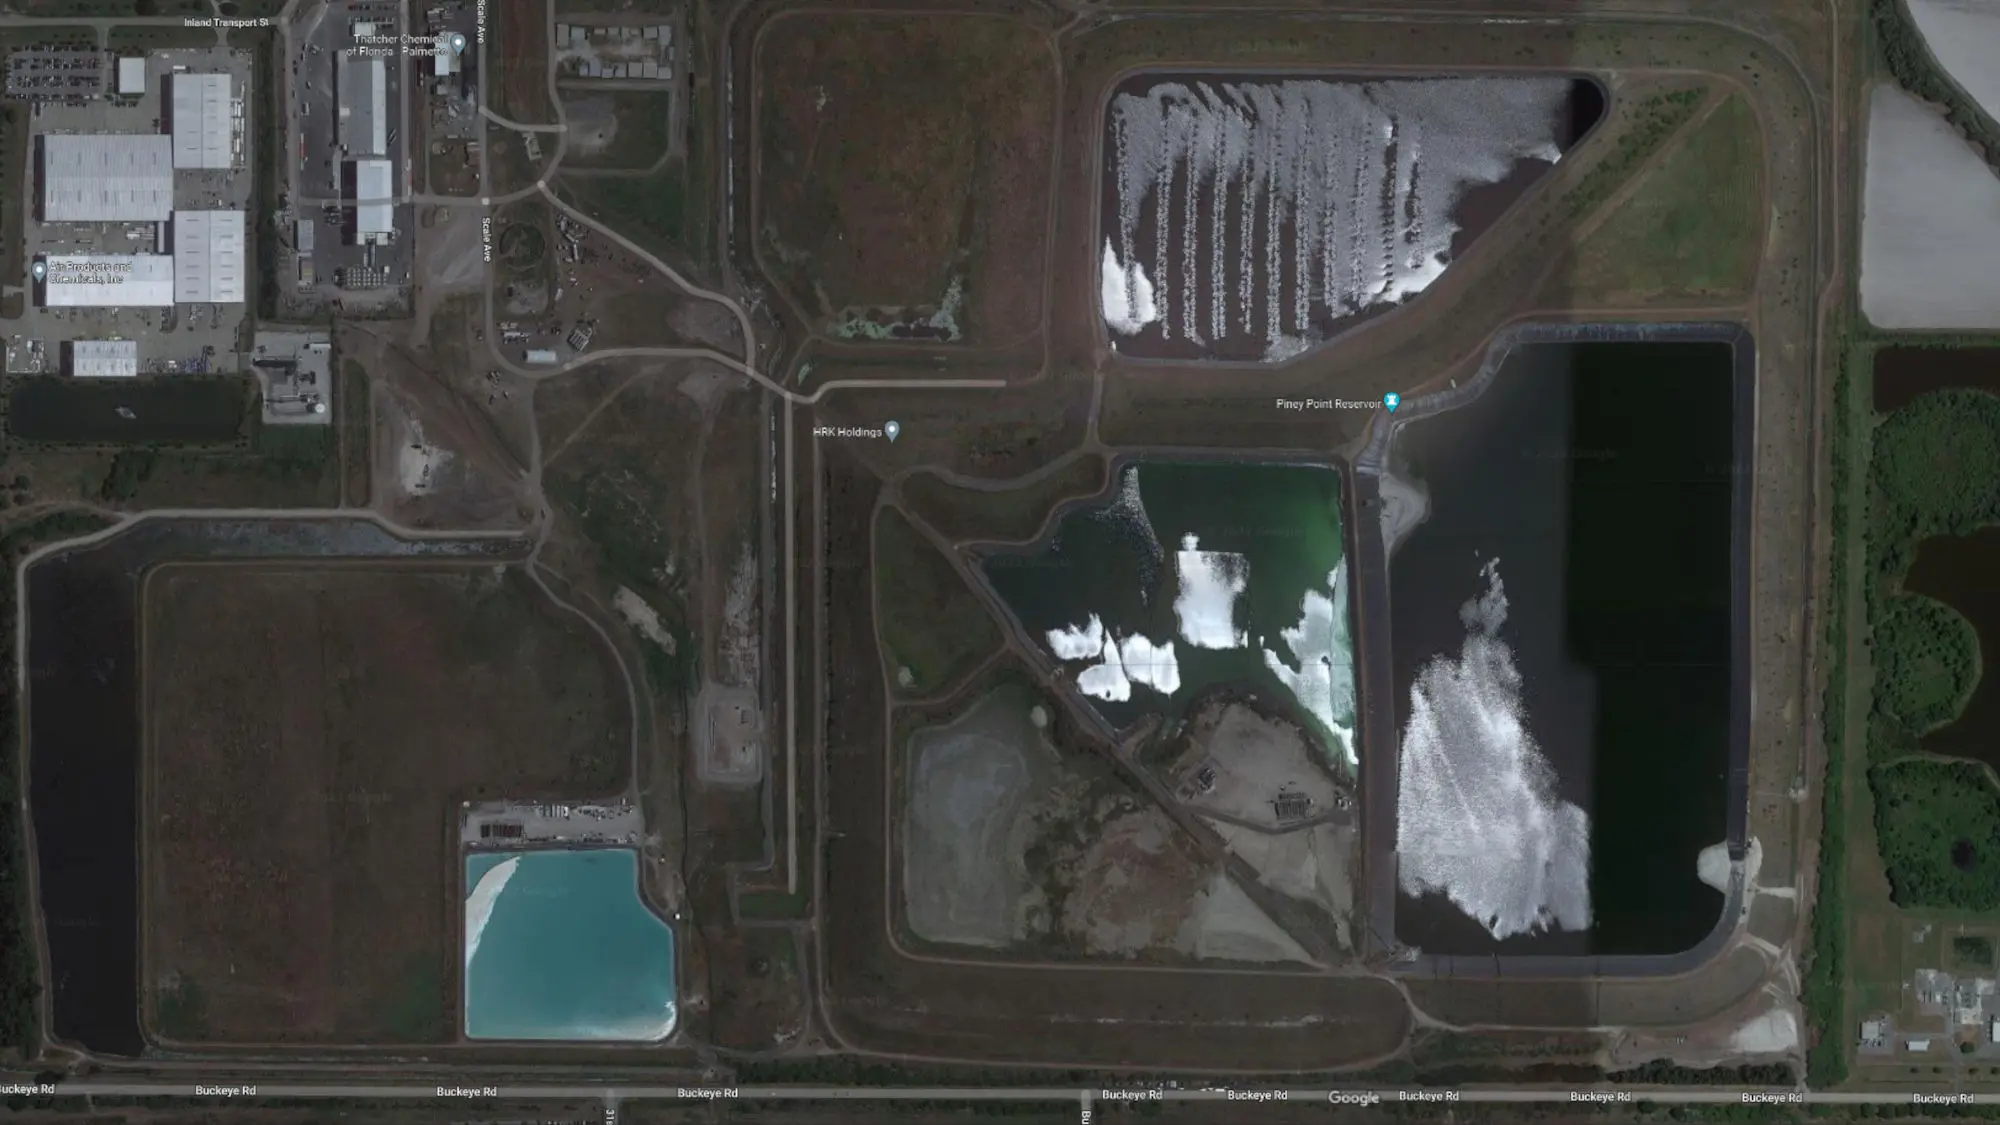 Satellite view of the site